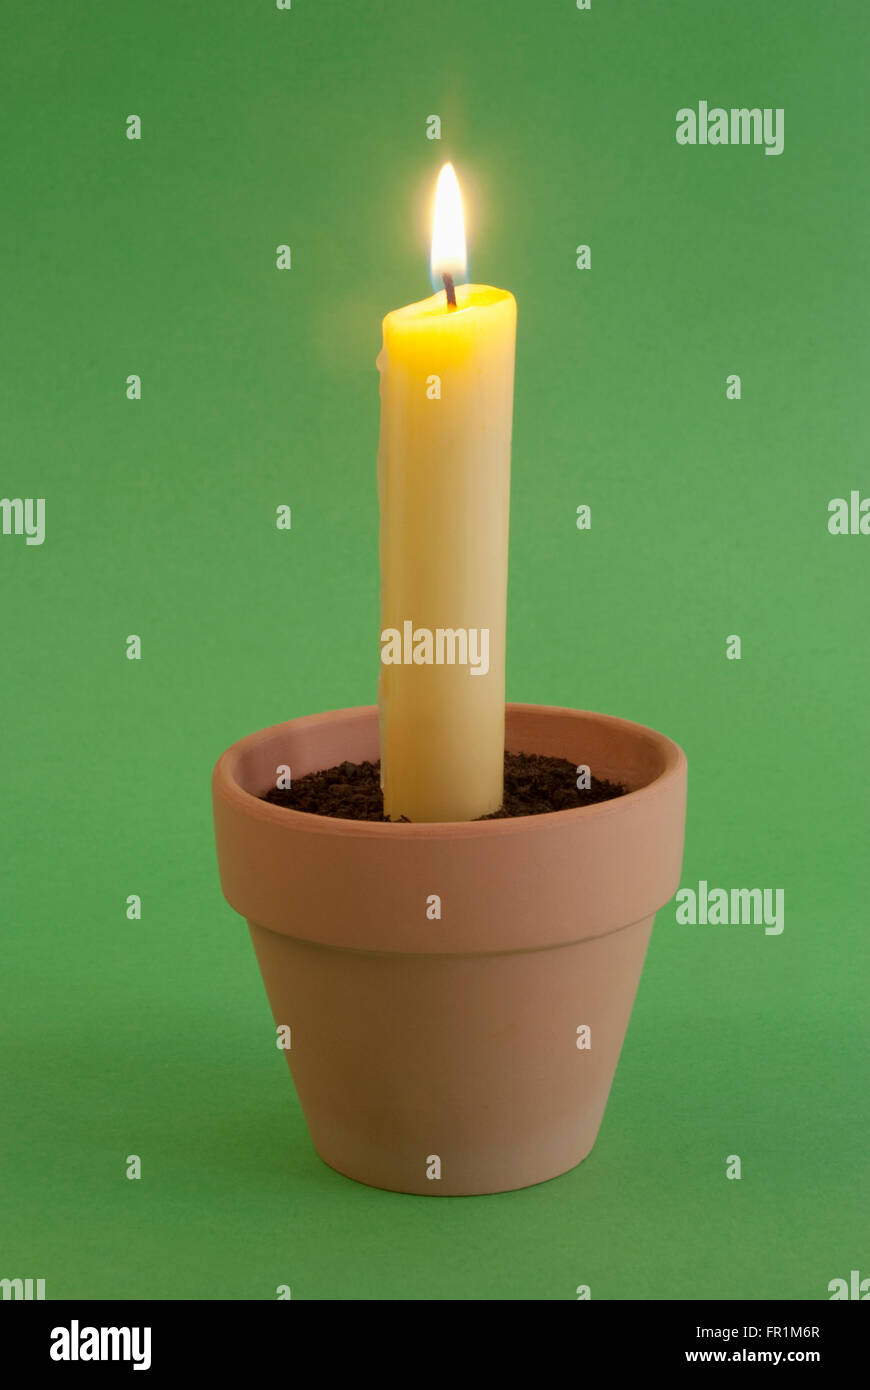 Burning candle in a flowerpot. Stock Photo